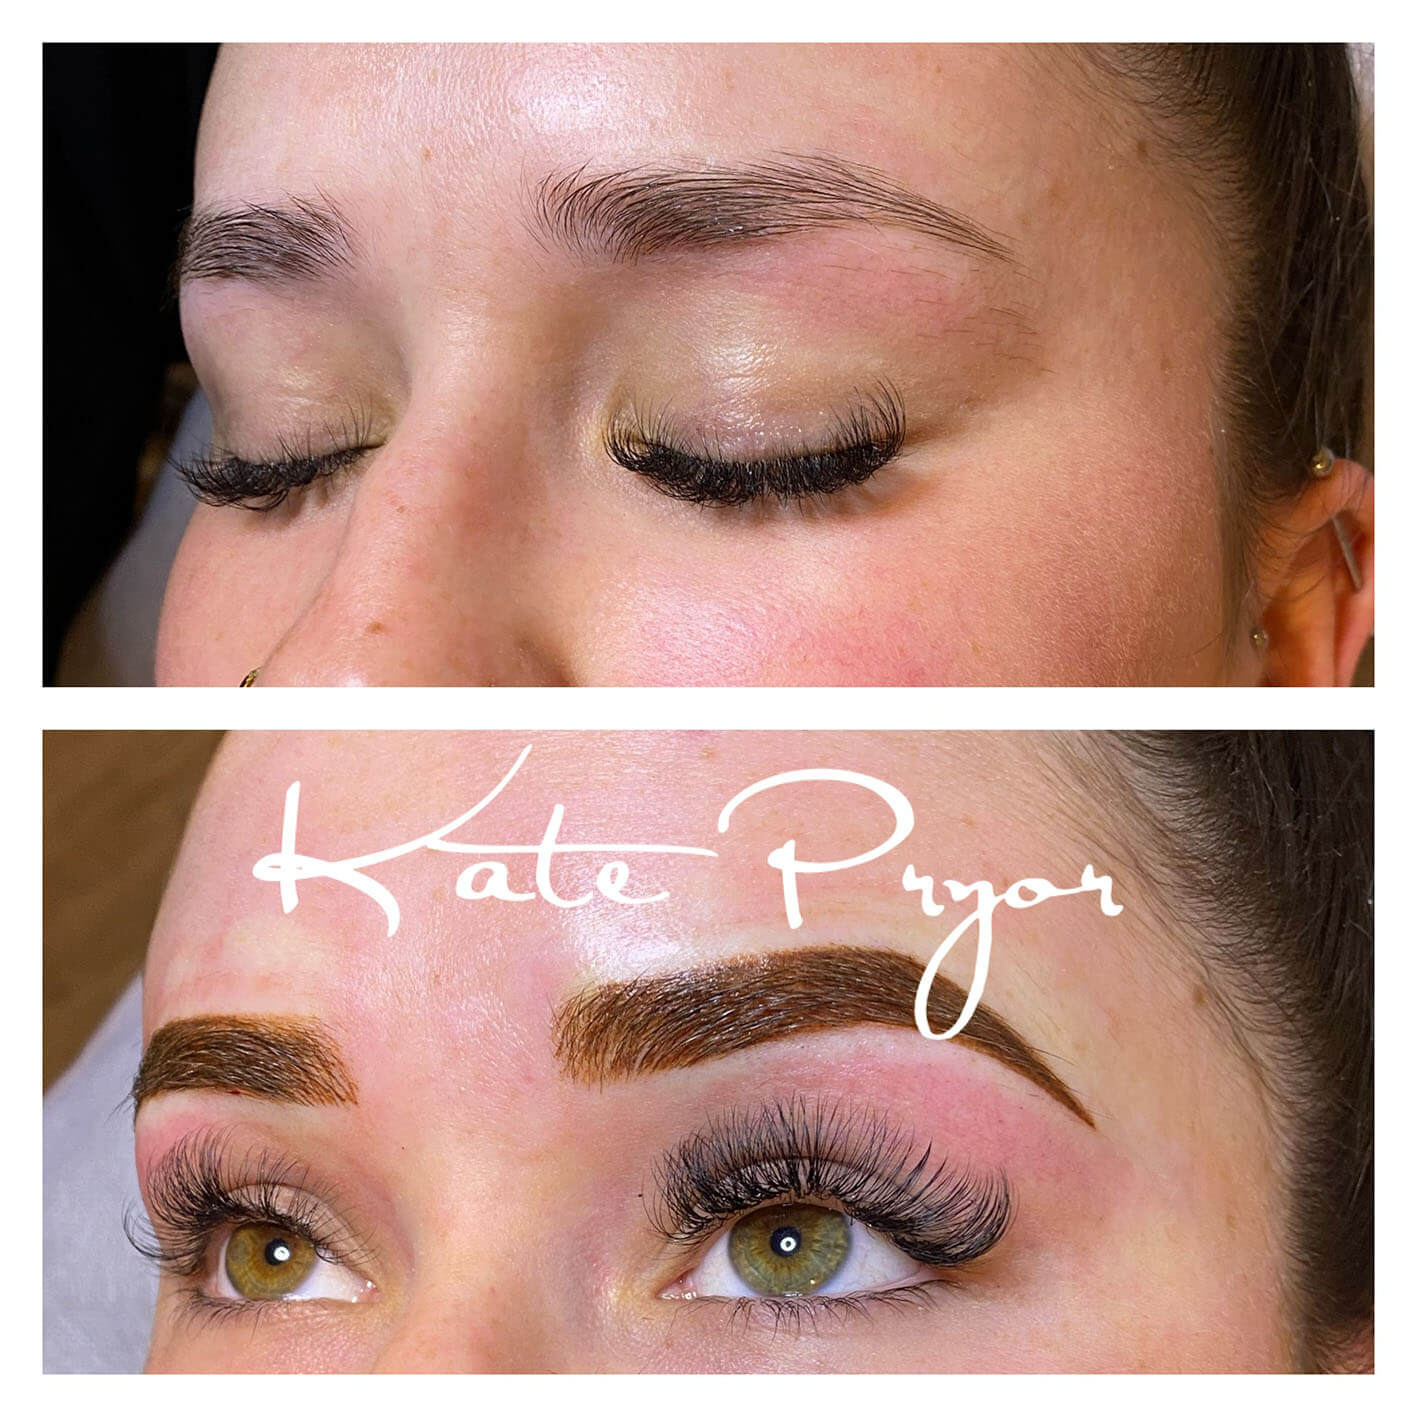 Elite-Skin-Cosmetic-Tattooing-Kate-Pryor-Before-After-7